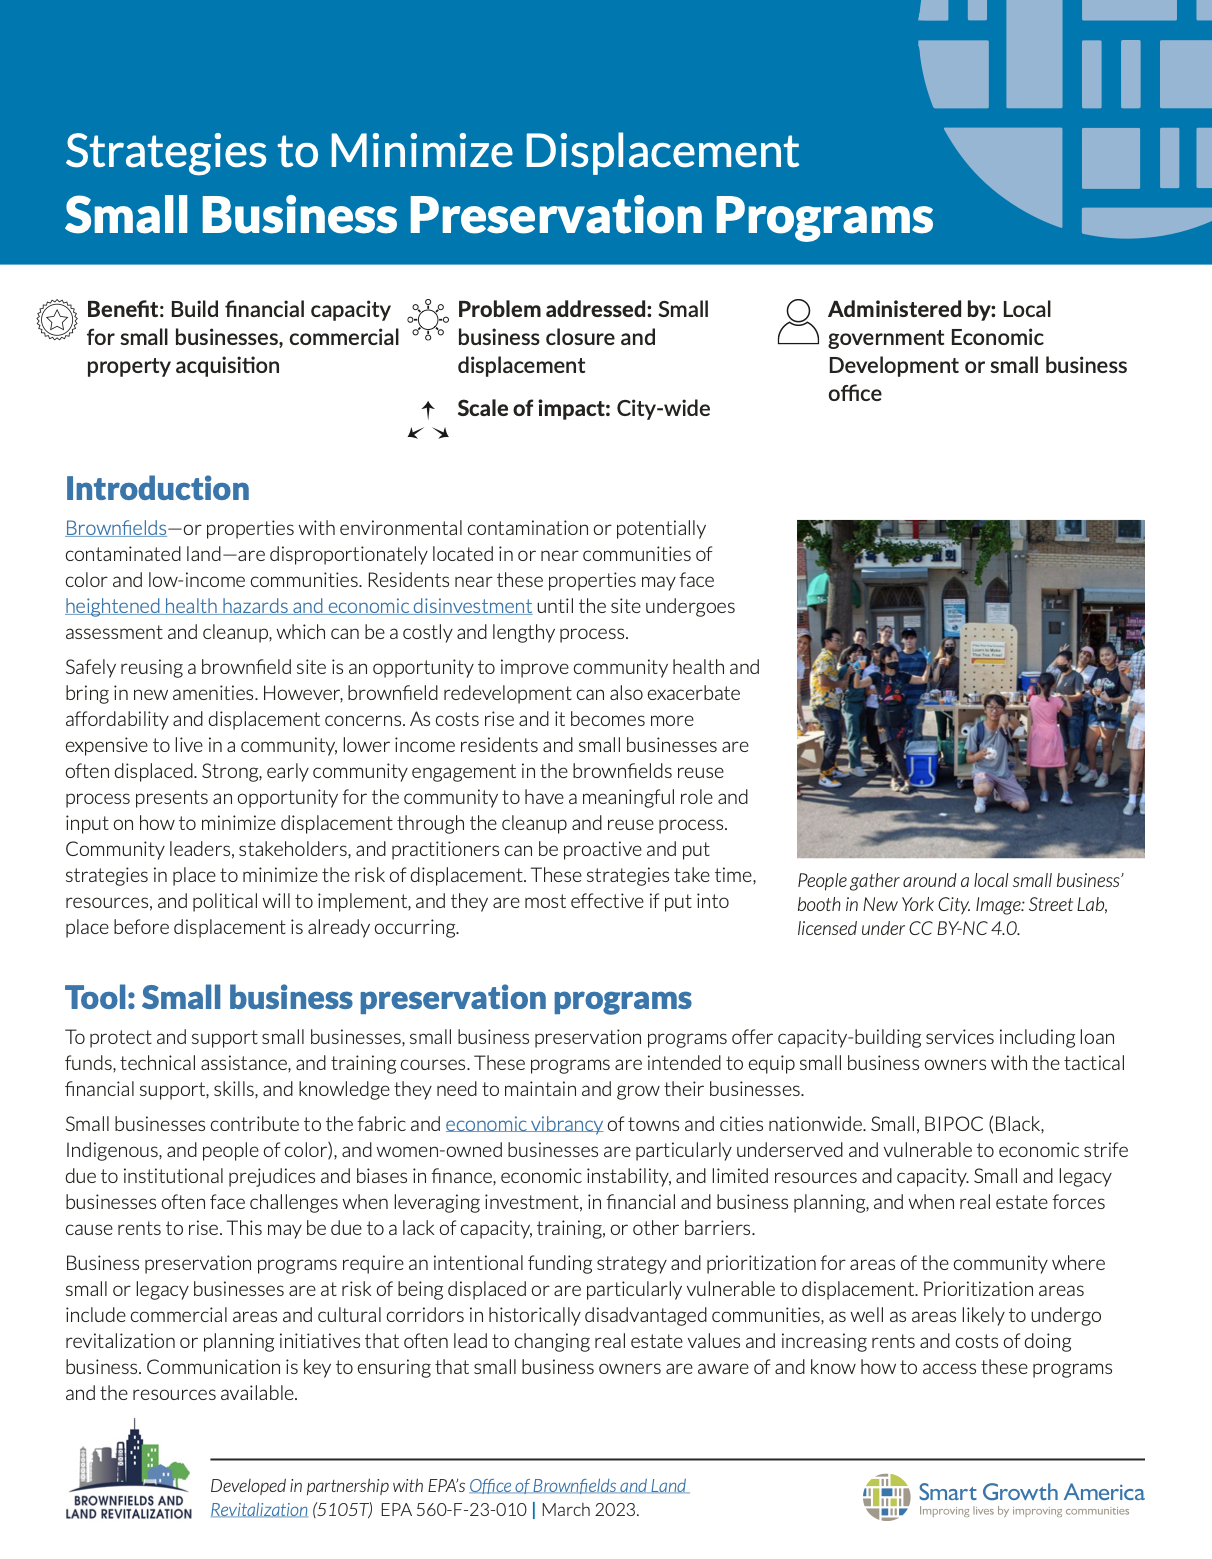 Strategies to Minimize Displacement: Small Business Preservation Programs